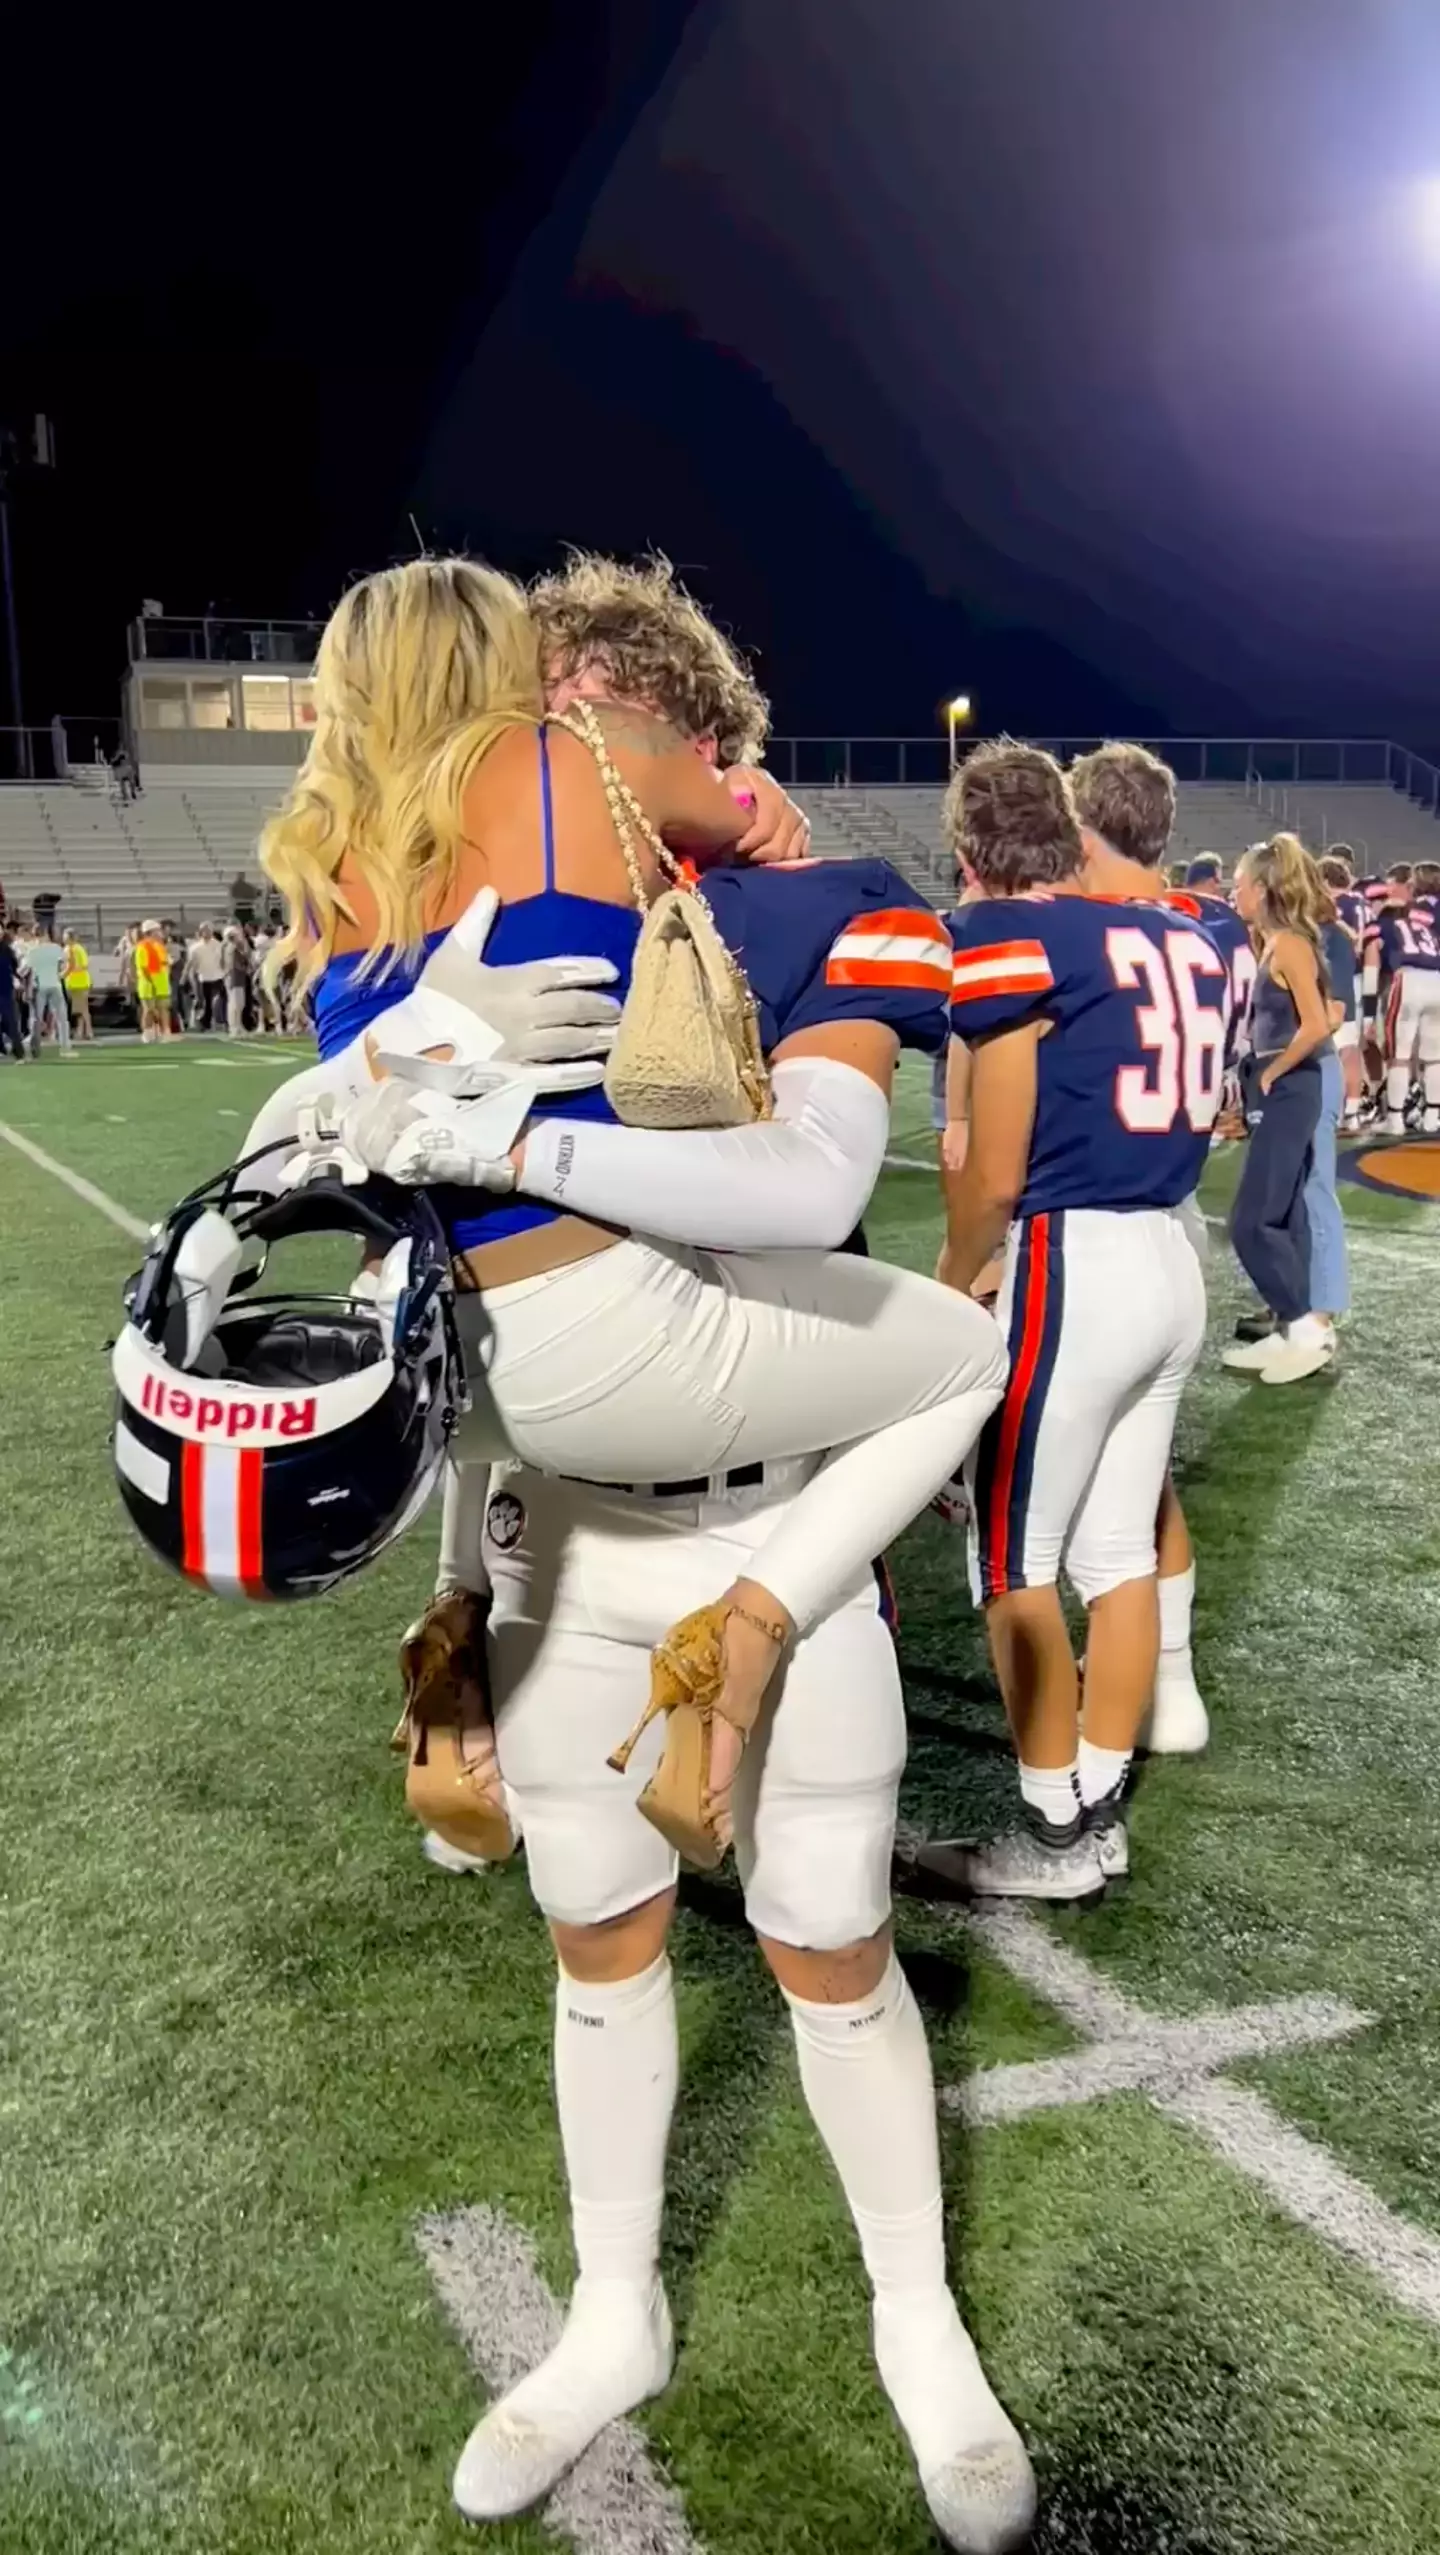 Amber hugged her son after the game.